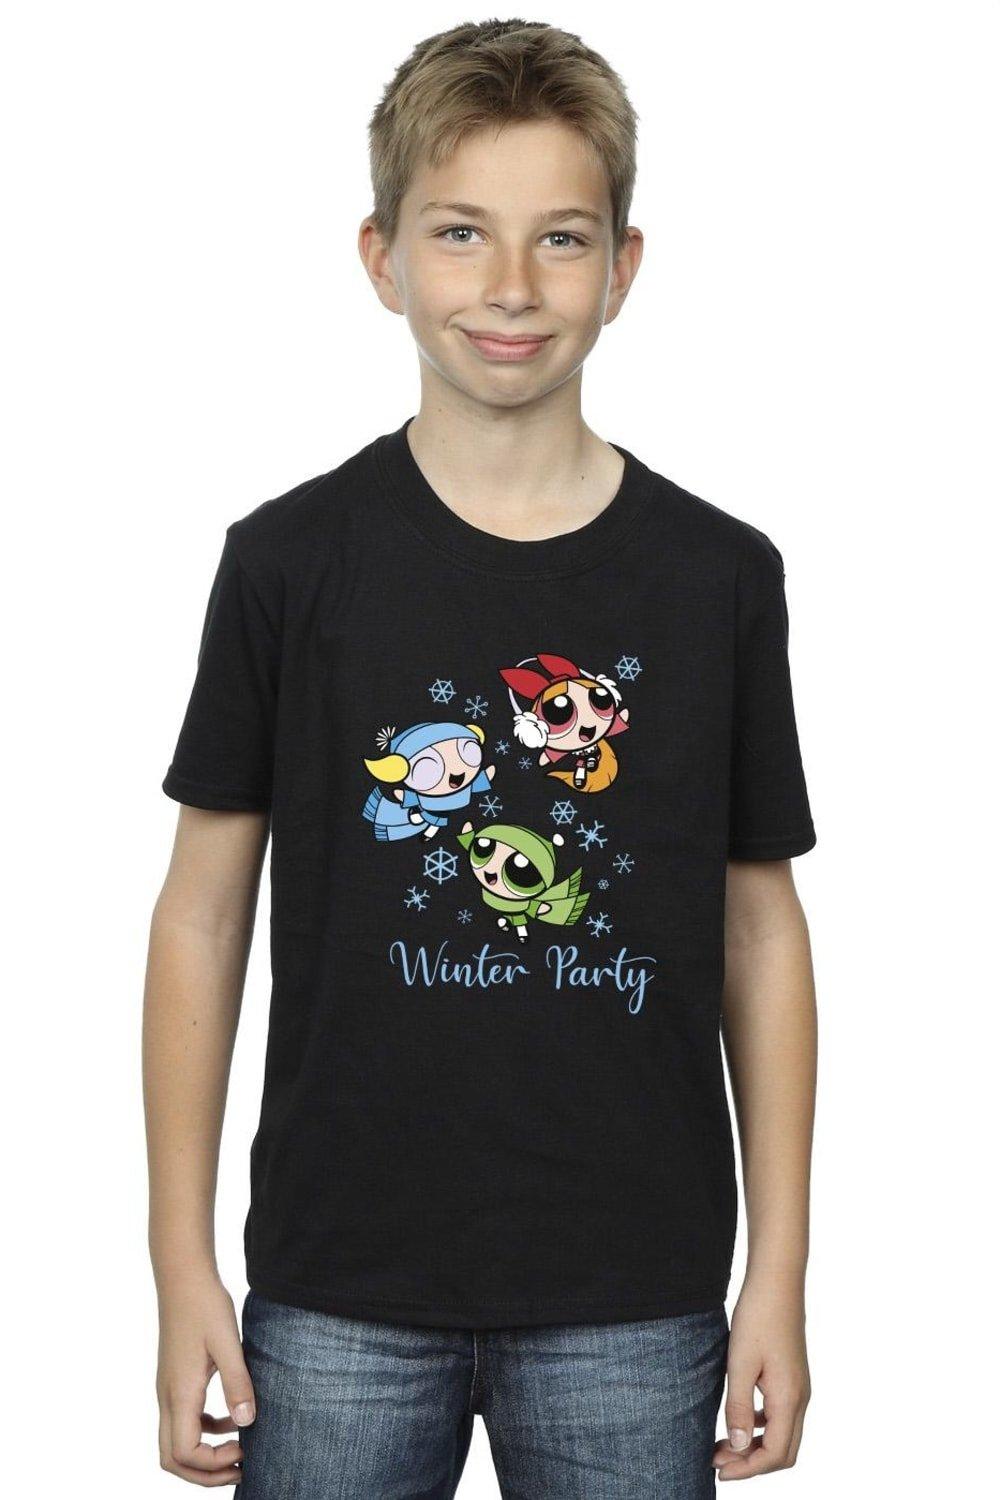 Winter Party T-Shirt